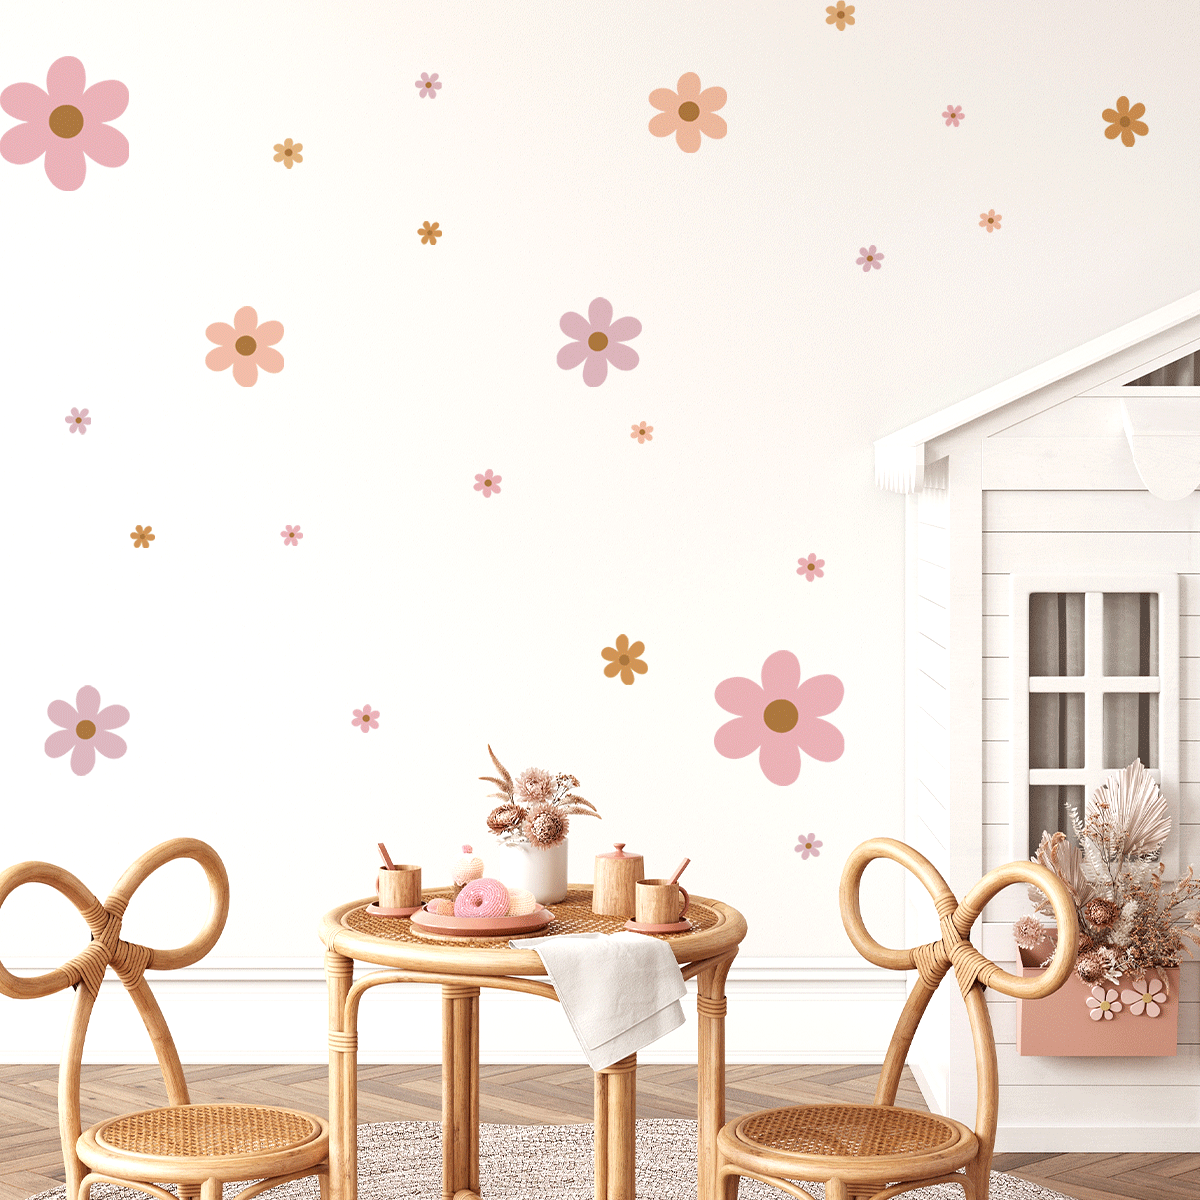 Flower wall stickers - Happy blooms (caramel-pastel shades)